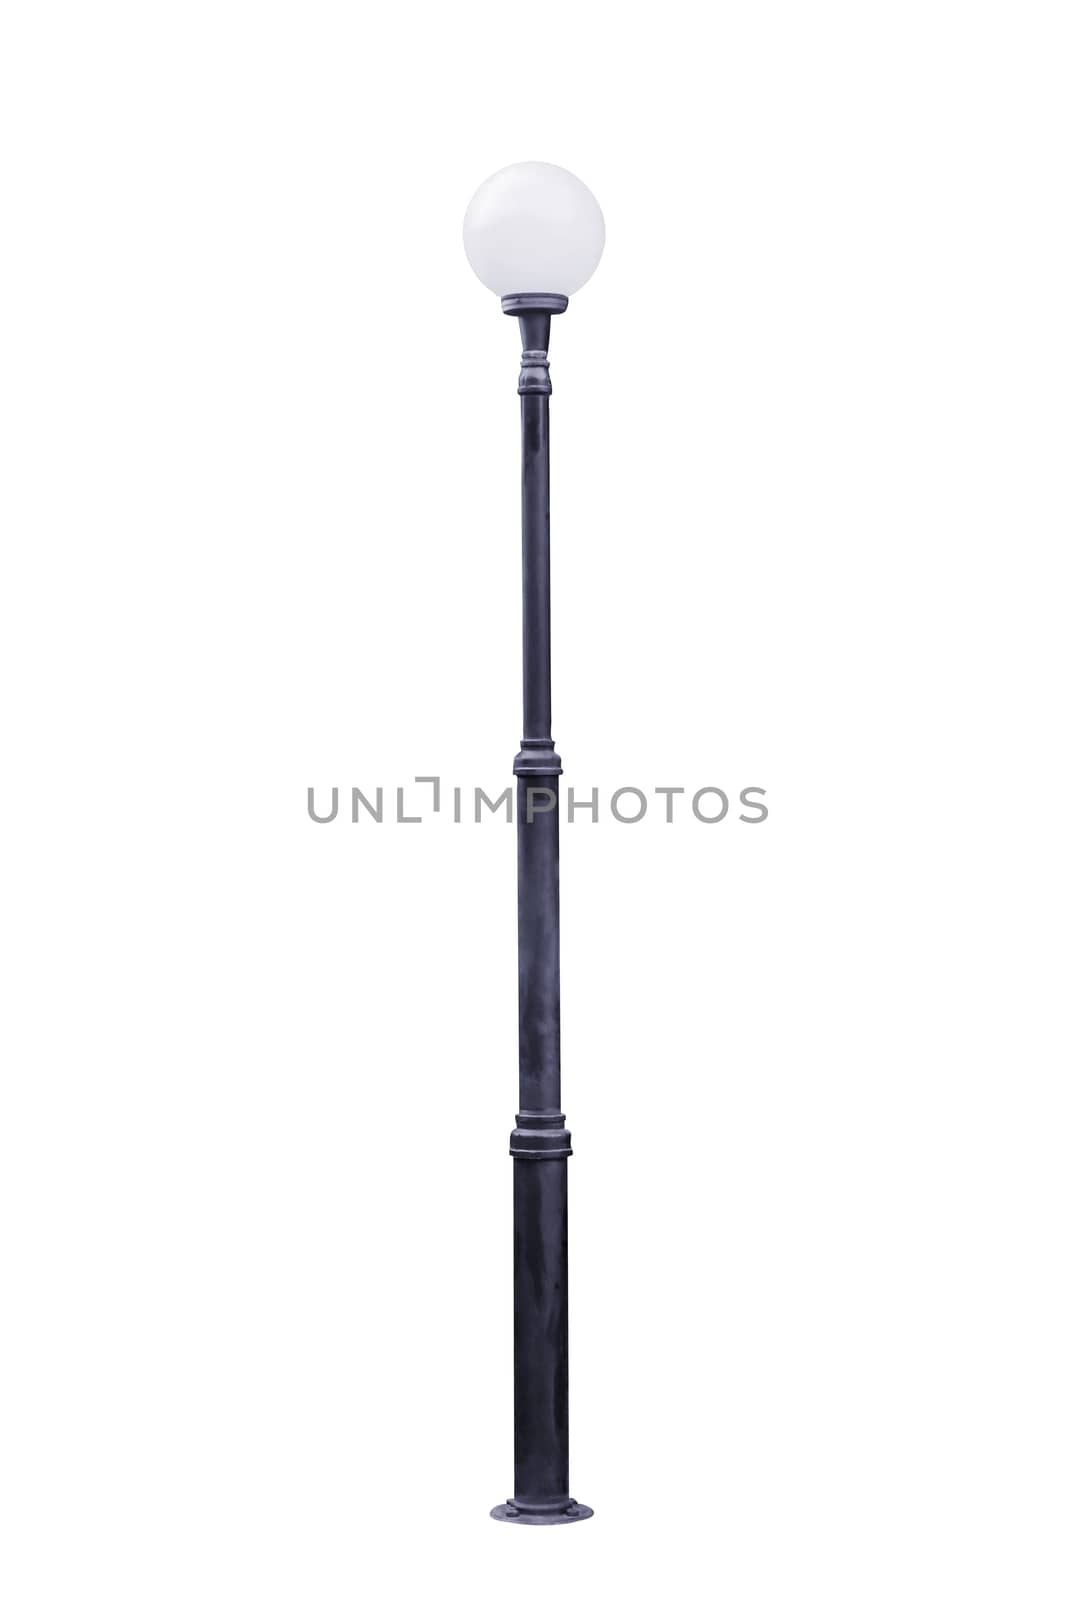 Light pole isolated by NuwatPhoto